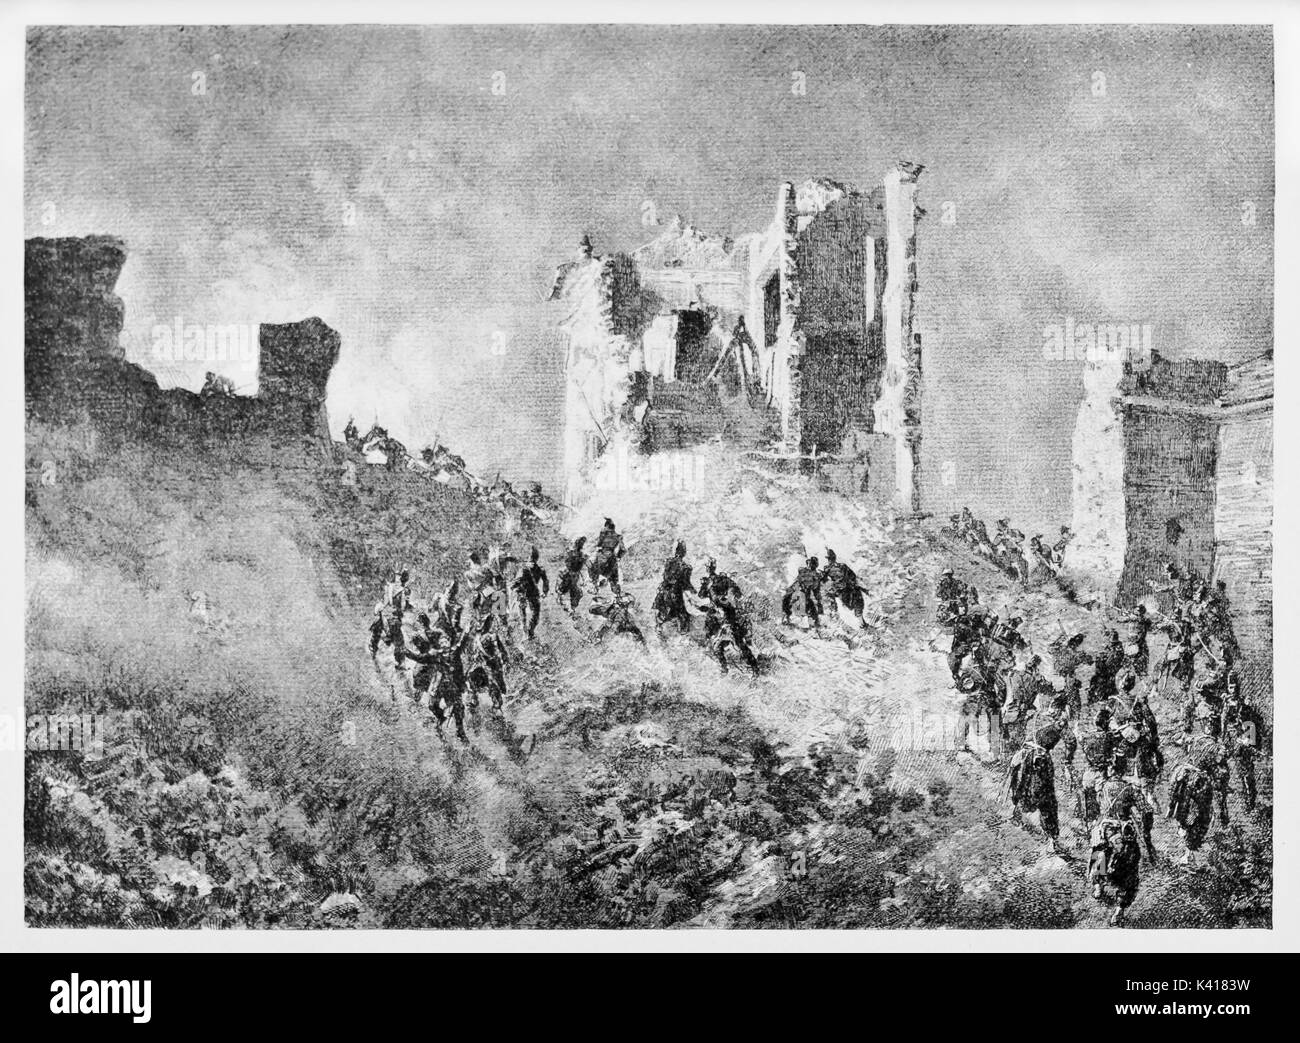 Ancient battle between ruins and smoke. Breach on Rome walls in 1849 (June 29 - 30 French troops assaulting Roman Republic). By E. Matania published on Garibaldi e i Suoi Tempi Milan Italy 1884 Stock Photo